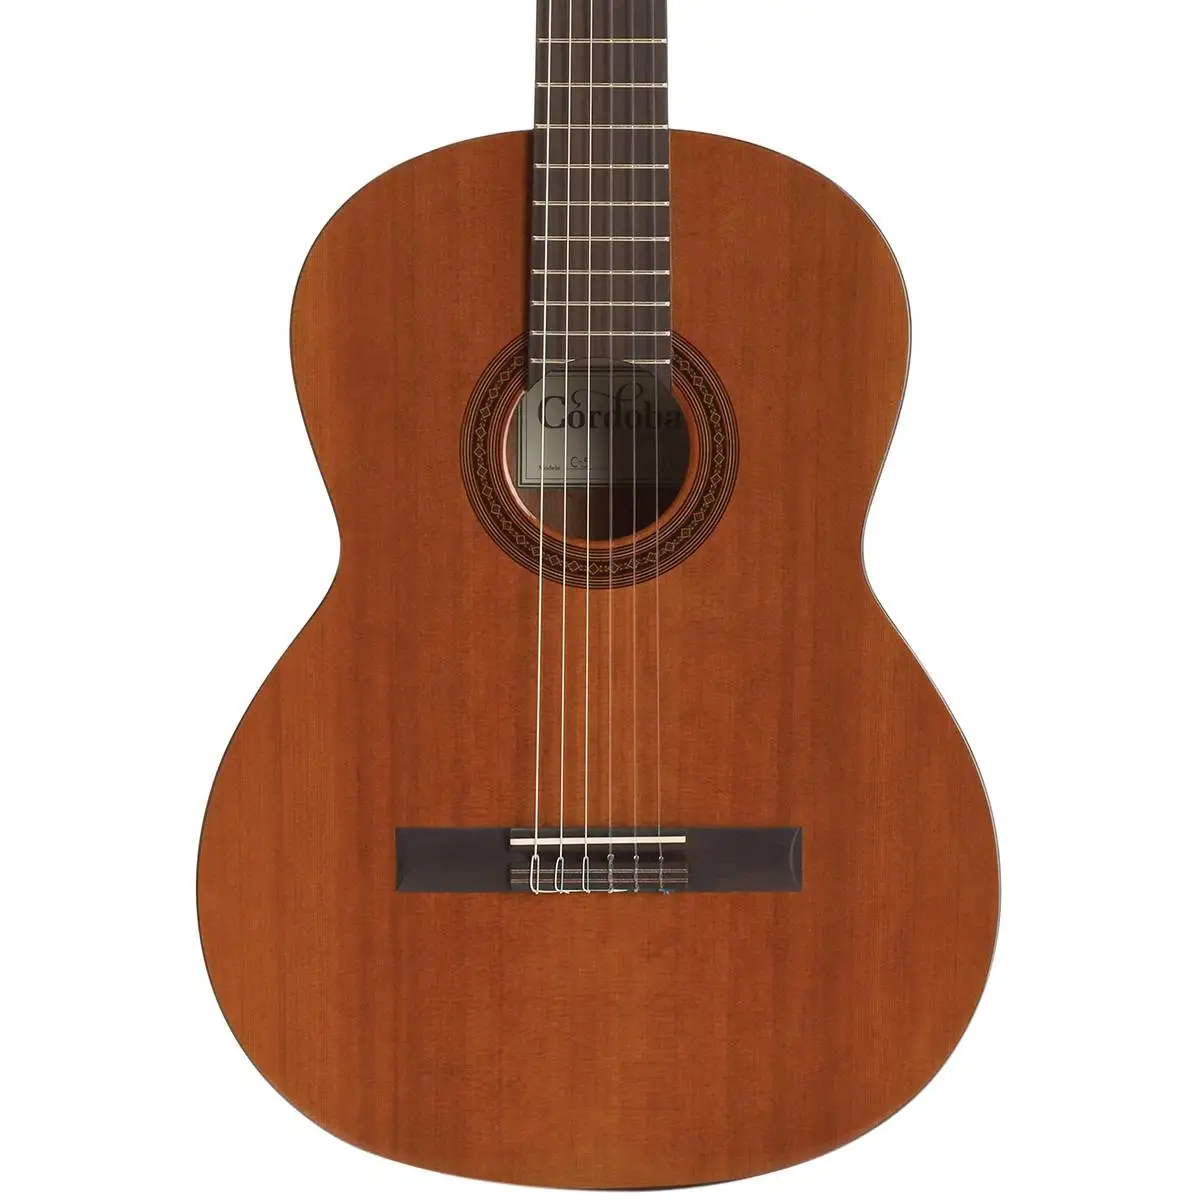 Cordoba C5 Classical Guitar Review: Embracing Tradition with Unmatched Elegance